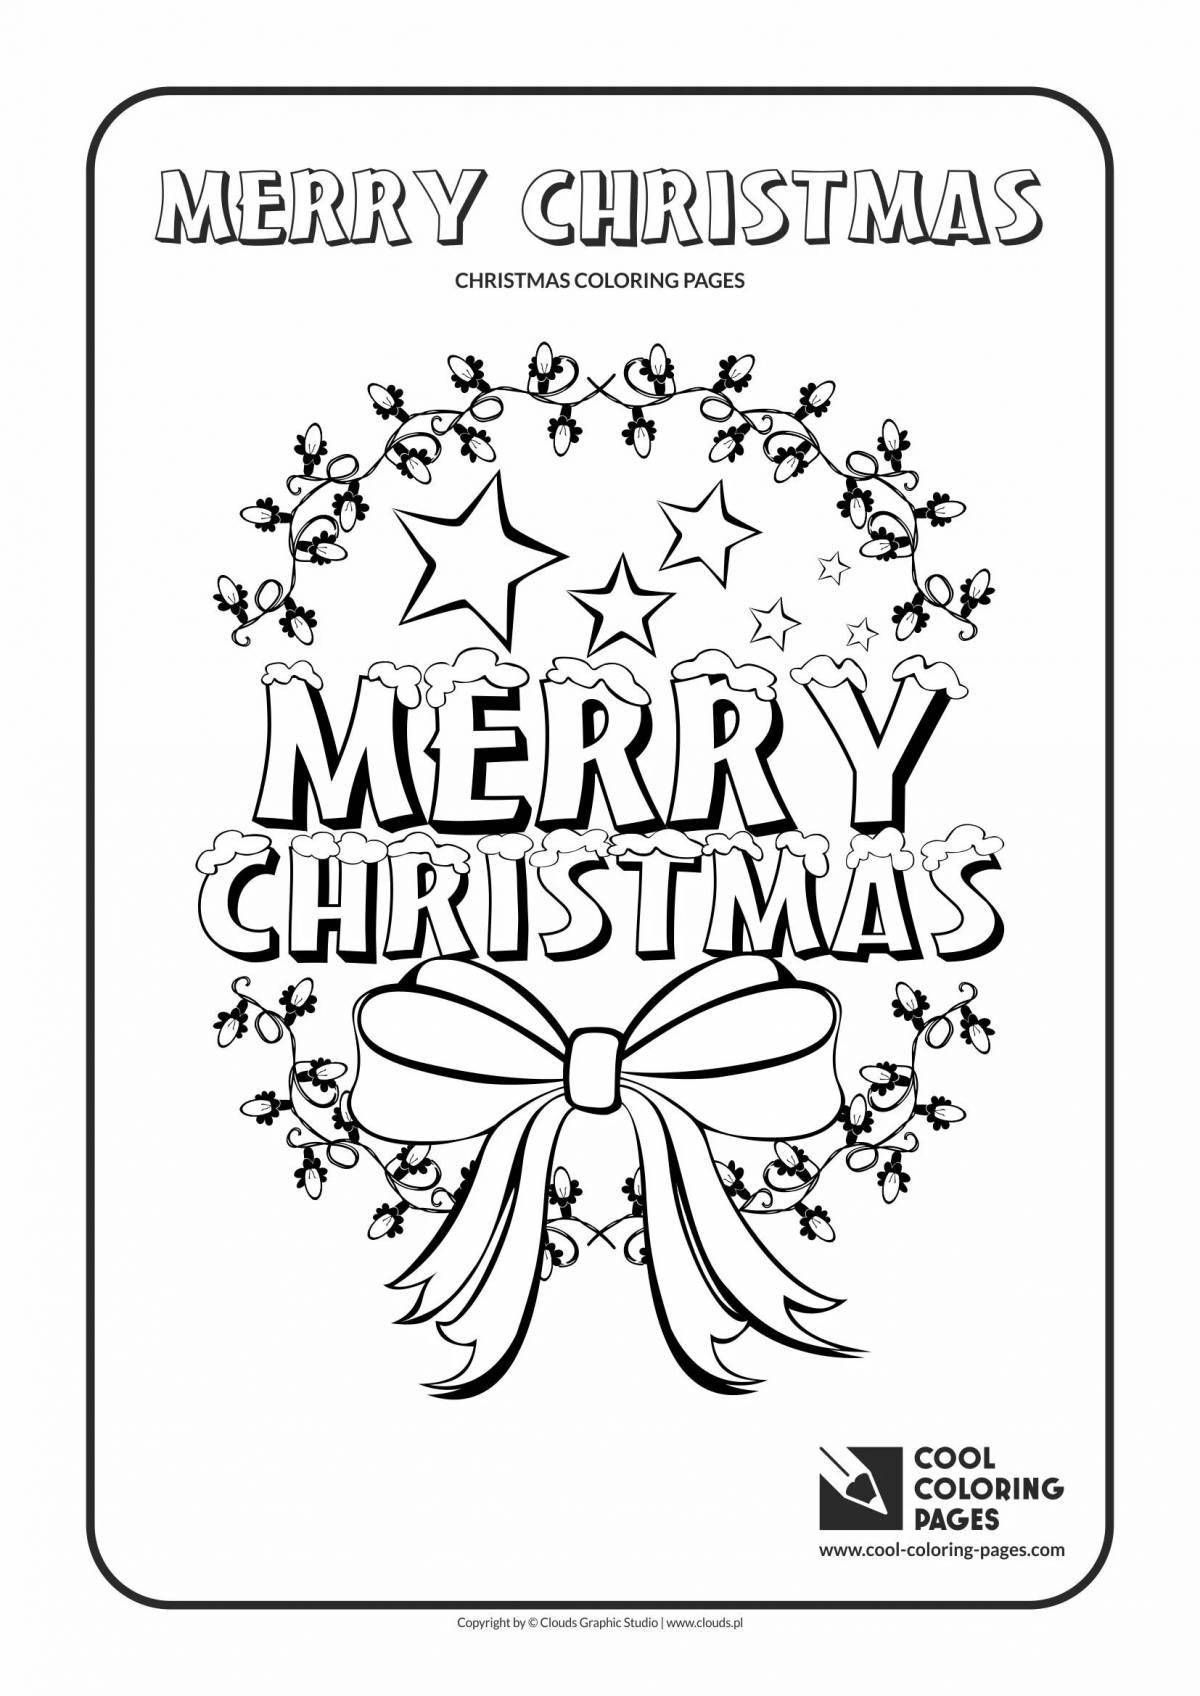 Mary's living Christmas coloring book